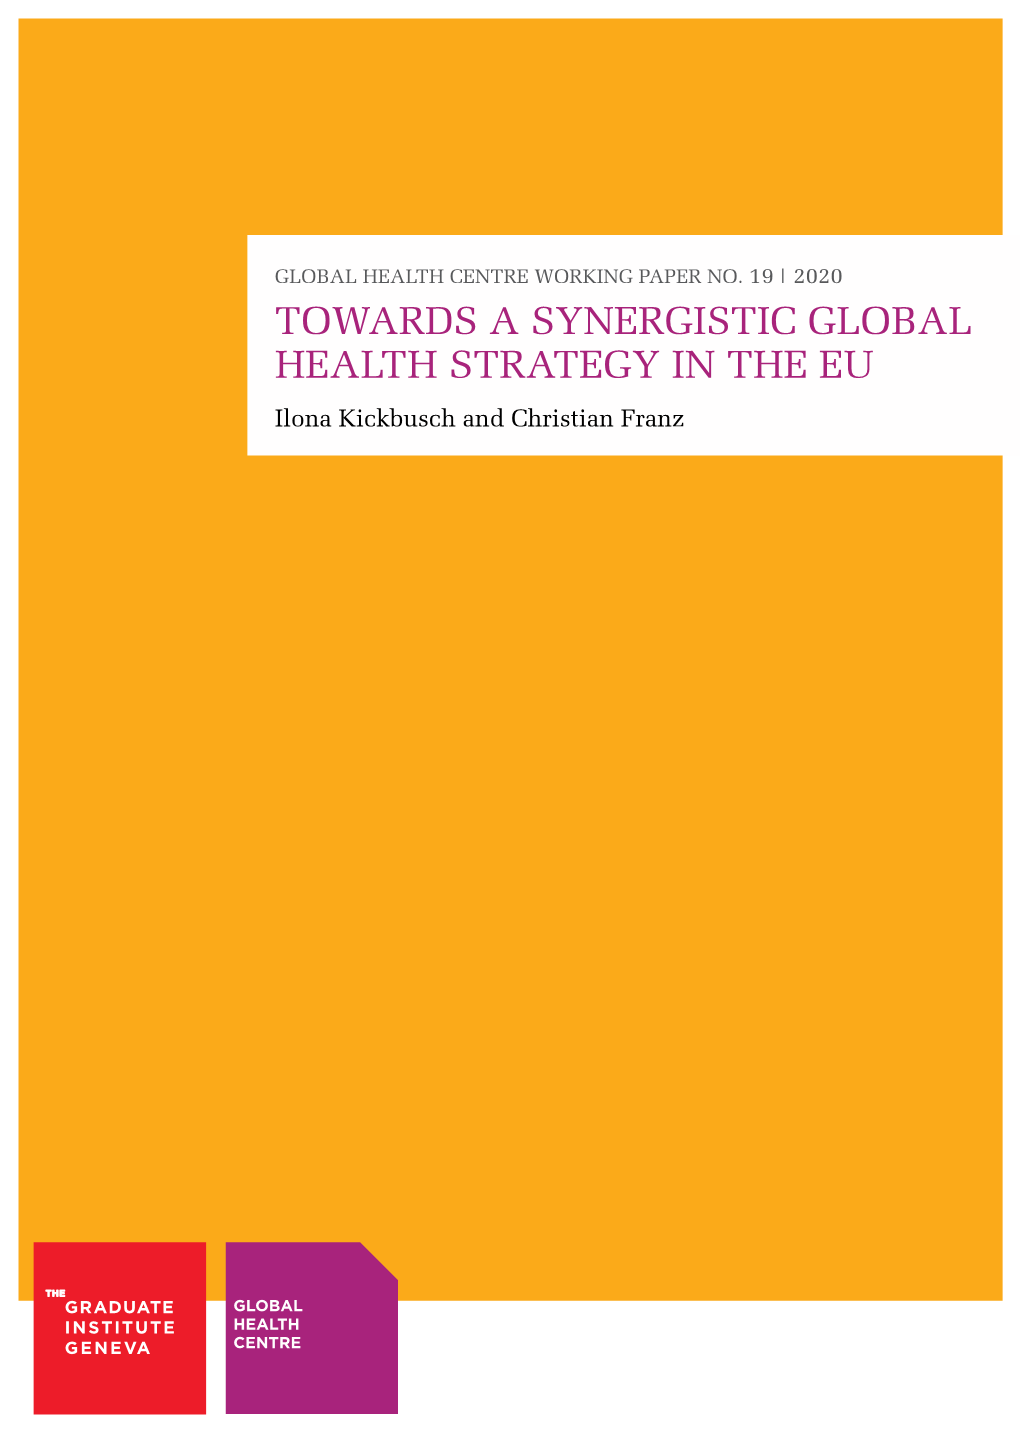 Paper on the European Role in Global Health